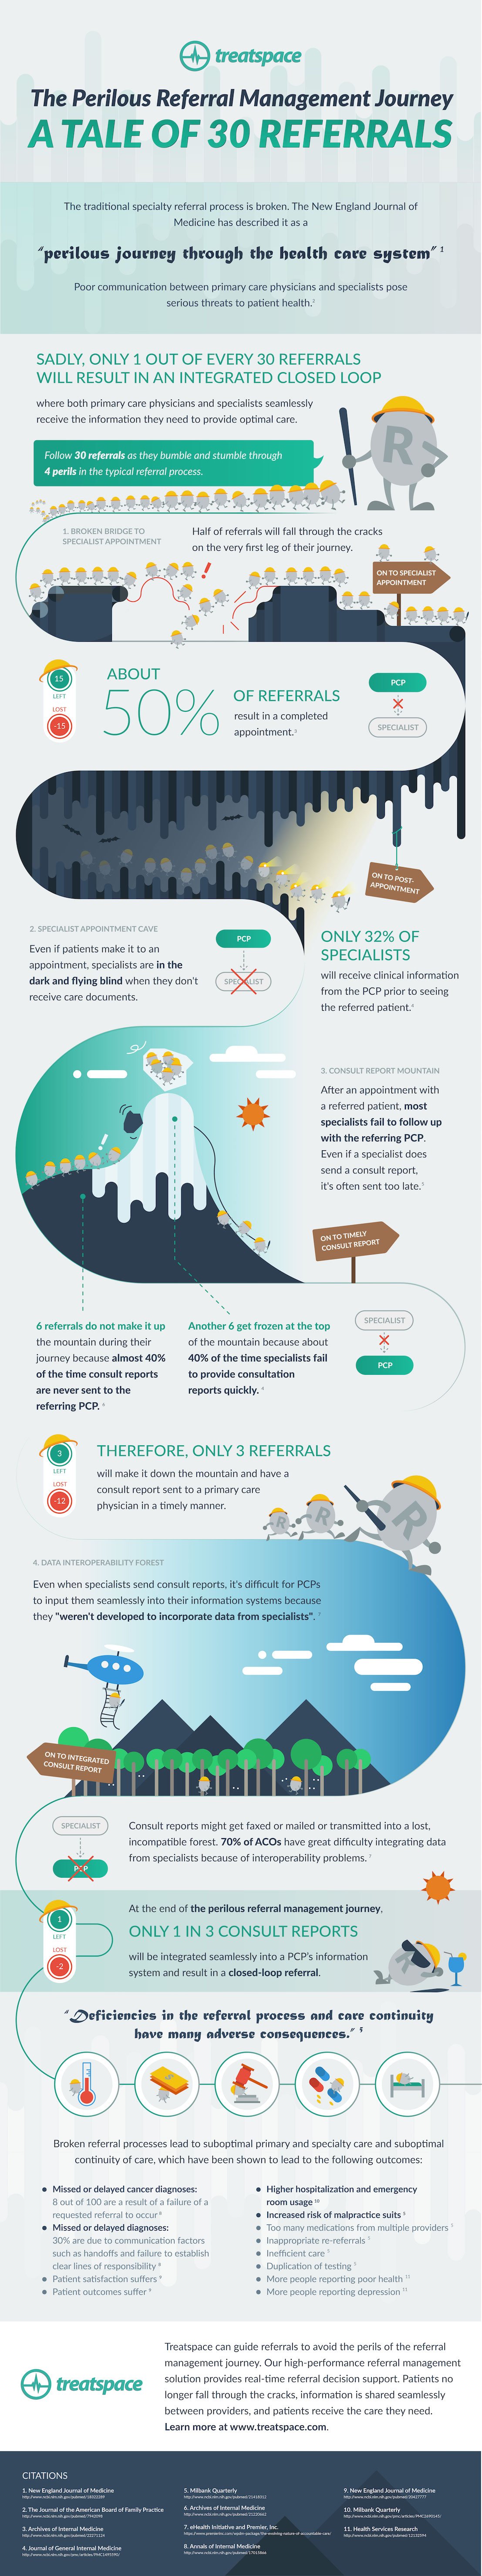 Referral-Mgmt-Infographic_Perilous-Journey.jpg